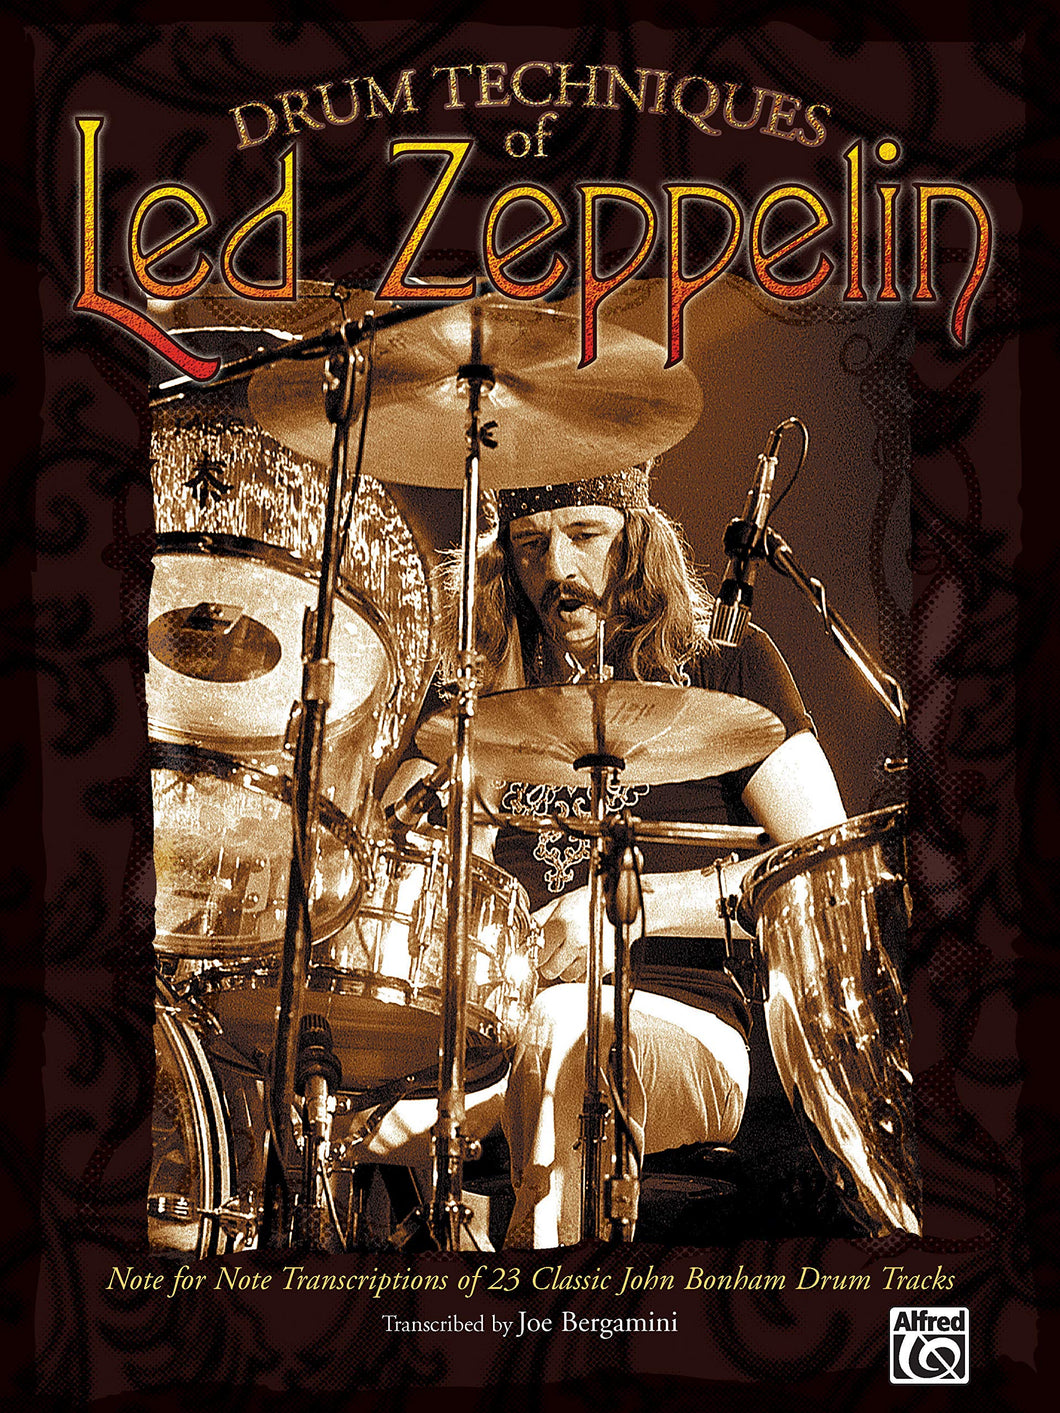 Fool in the Rain - Led Zeppelin - Collection of Drum Transcriptions / Drum Sheet Music - Alfred Music DTLZNFNT